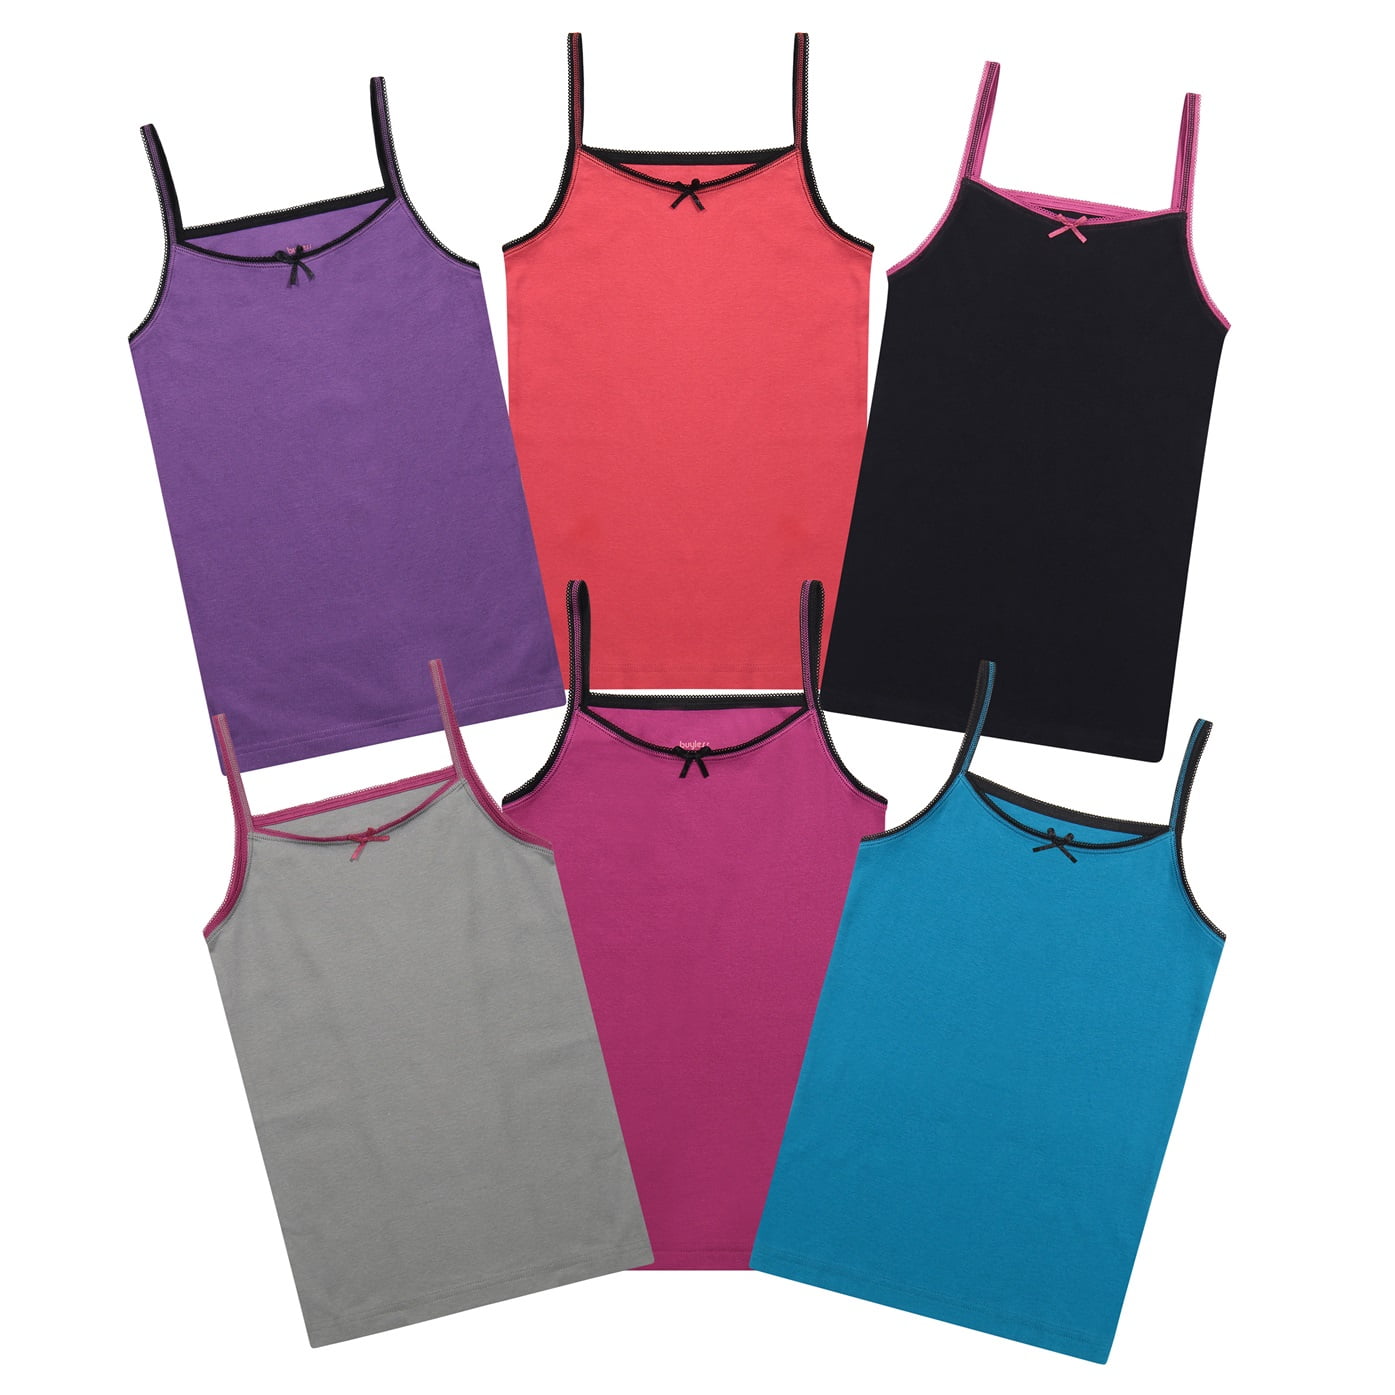 Buyless Fashion Girls Tagless Cami Scoop Neck Undershirts Cotton Tank Tops with Trim and Strap 6 Pack